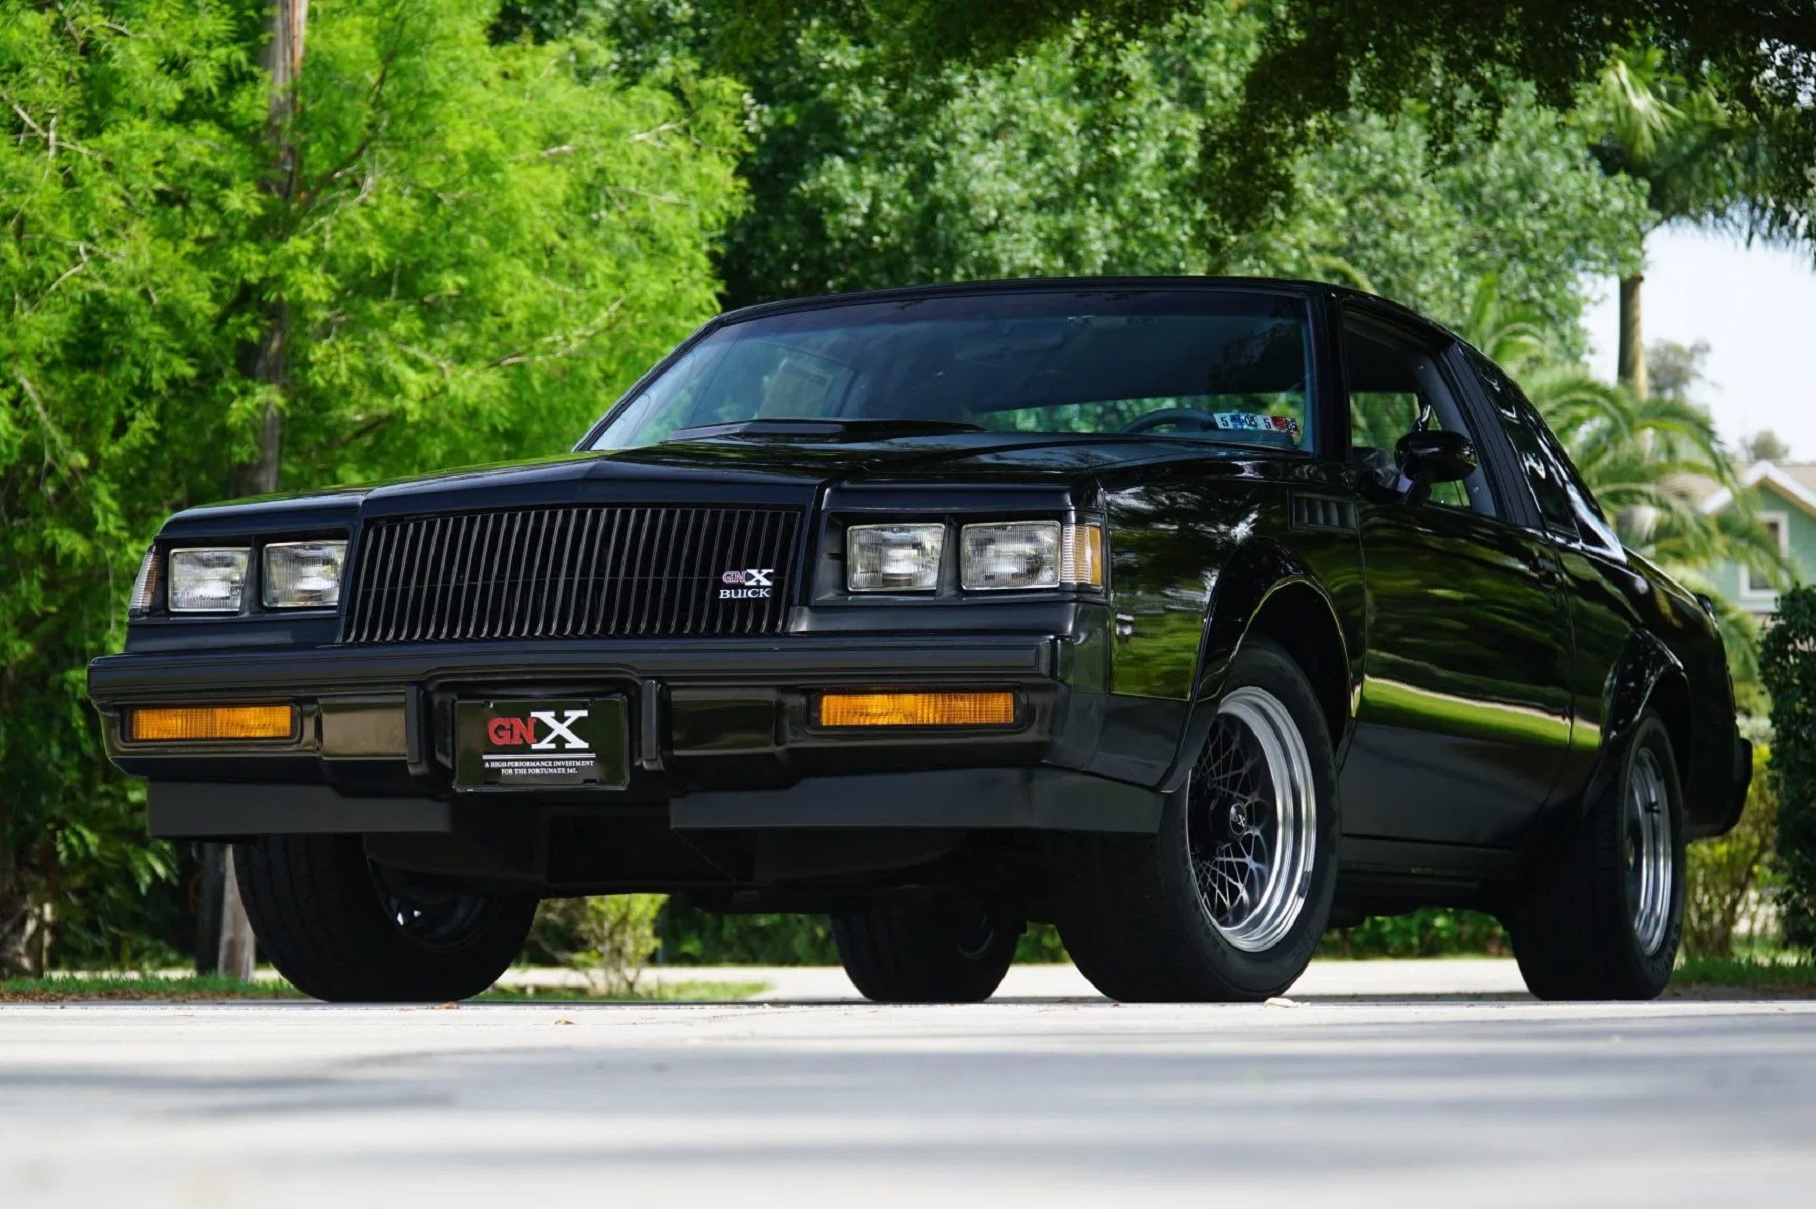 Why Did This 1987 Buick GNX Just Sell for $000?